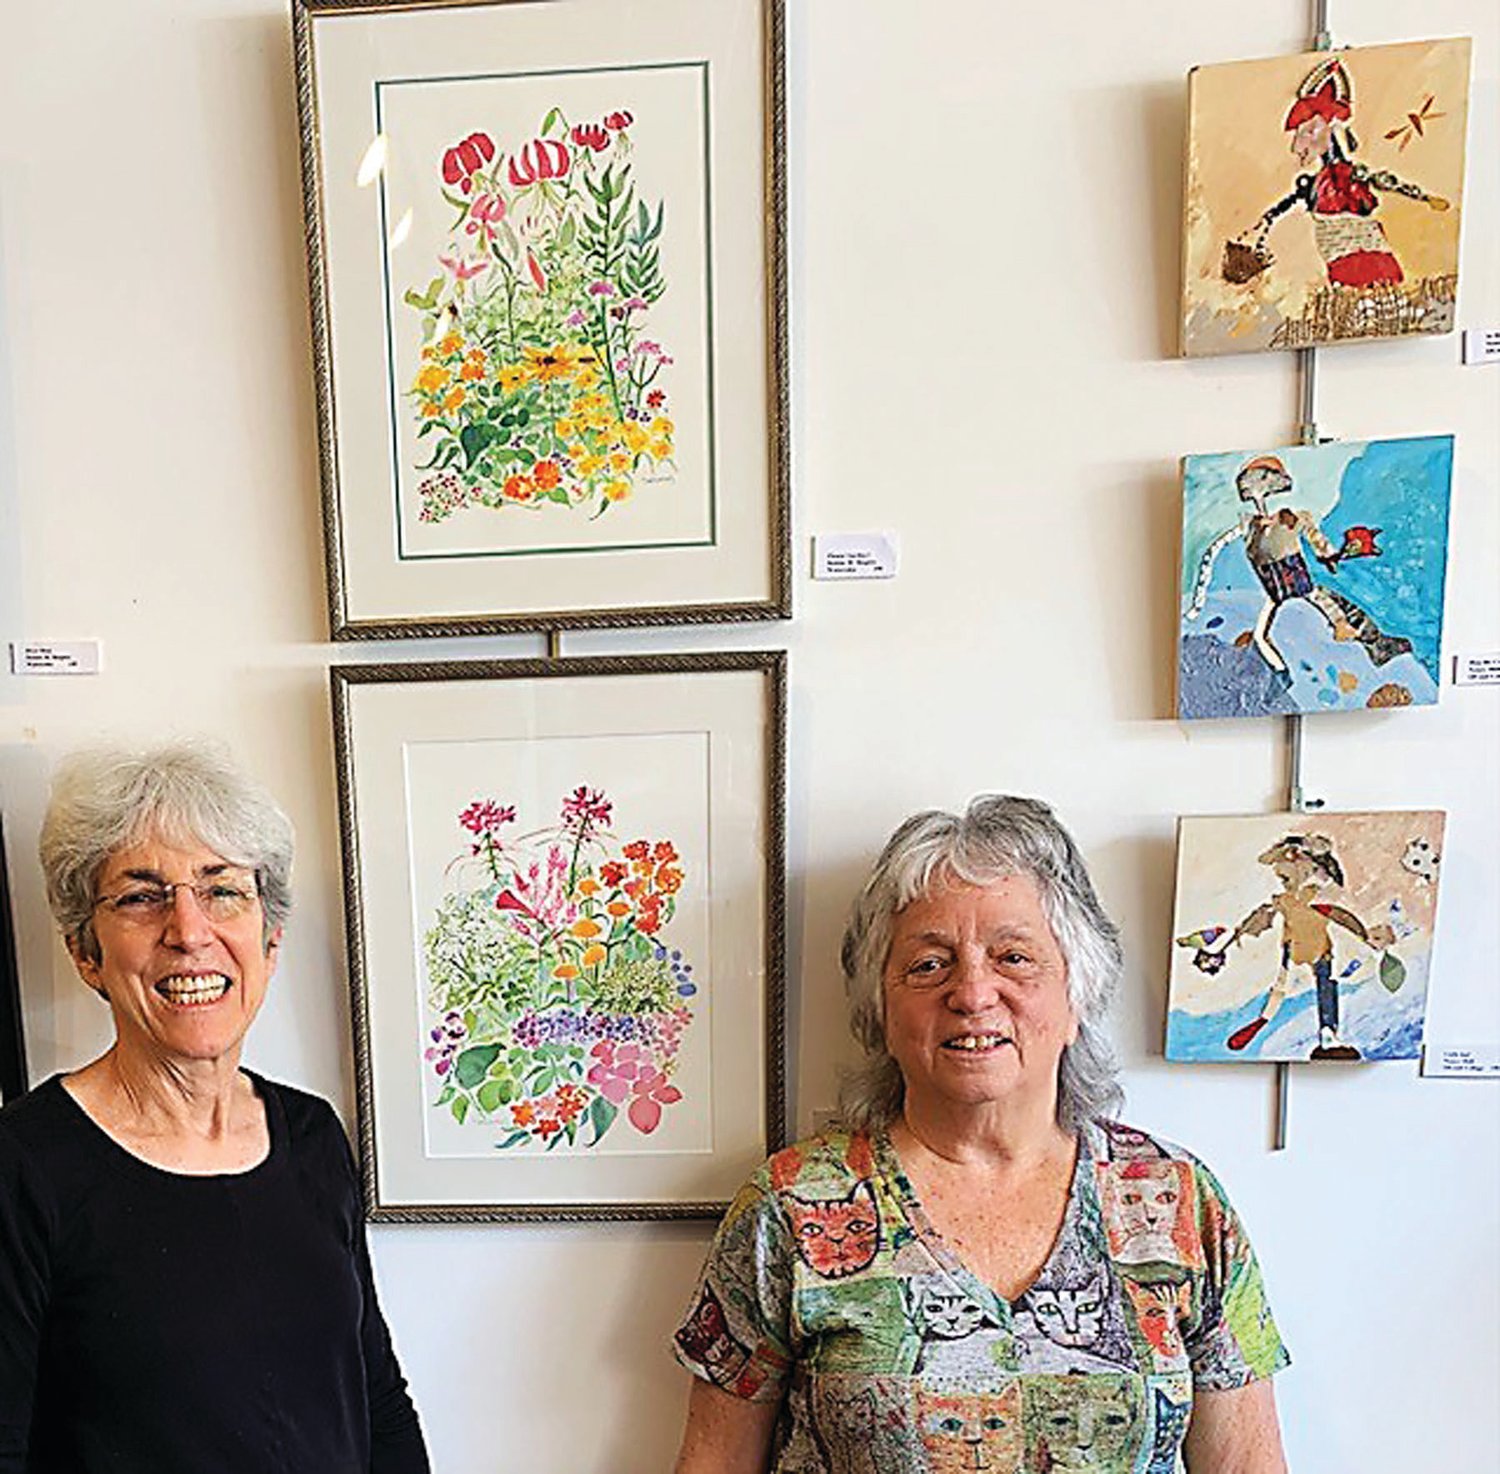 Debbie M. Shapiro and Nancy Shill stand with some of their artwork at their show at Bucks on Bridge in Lambertville, N.J., running through June.